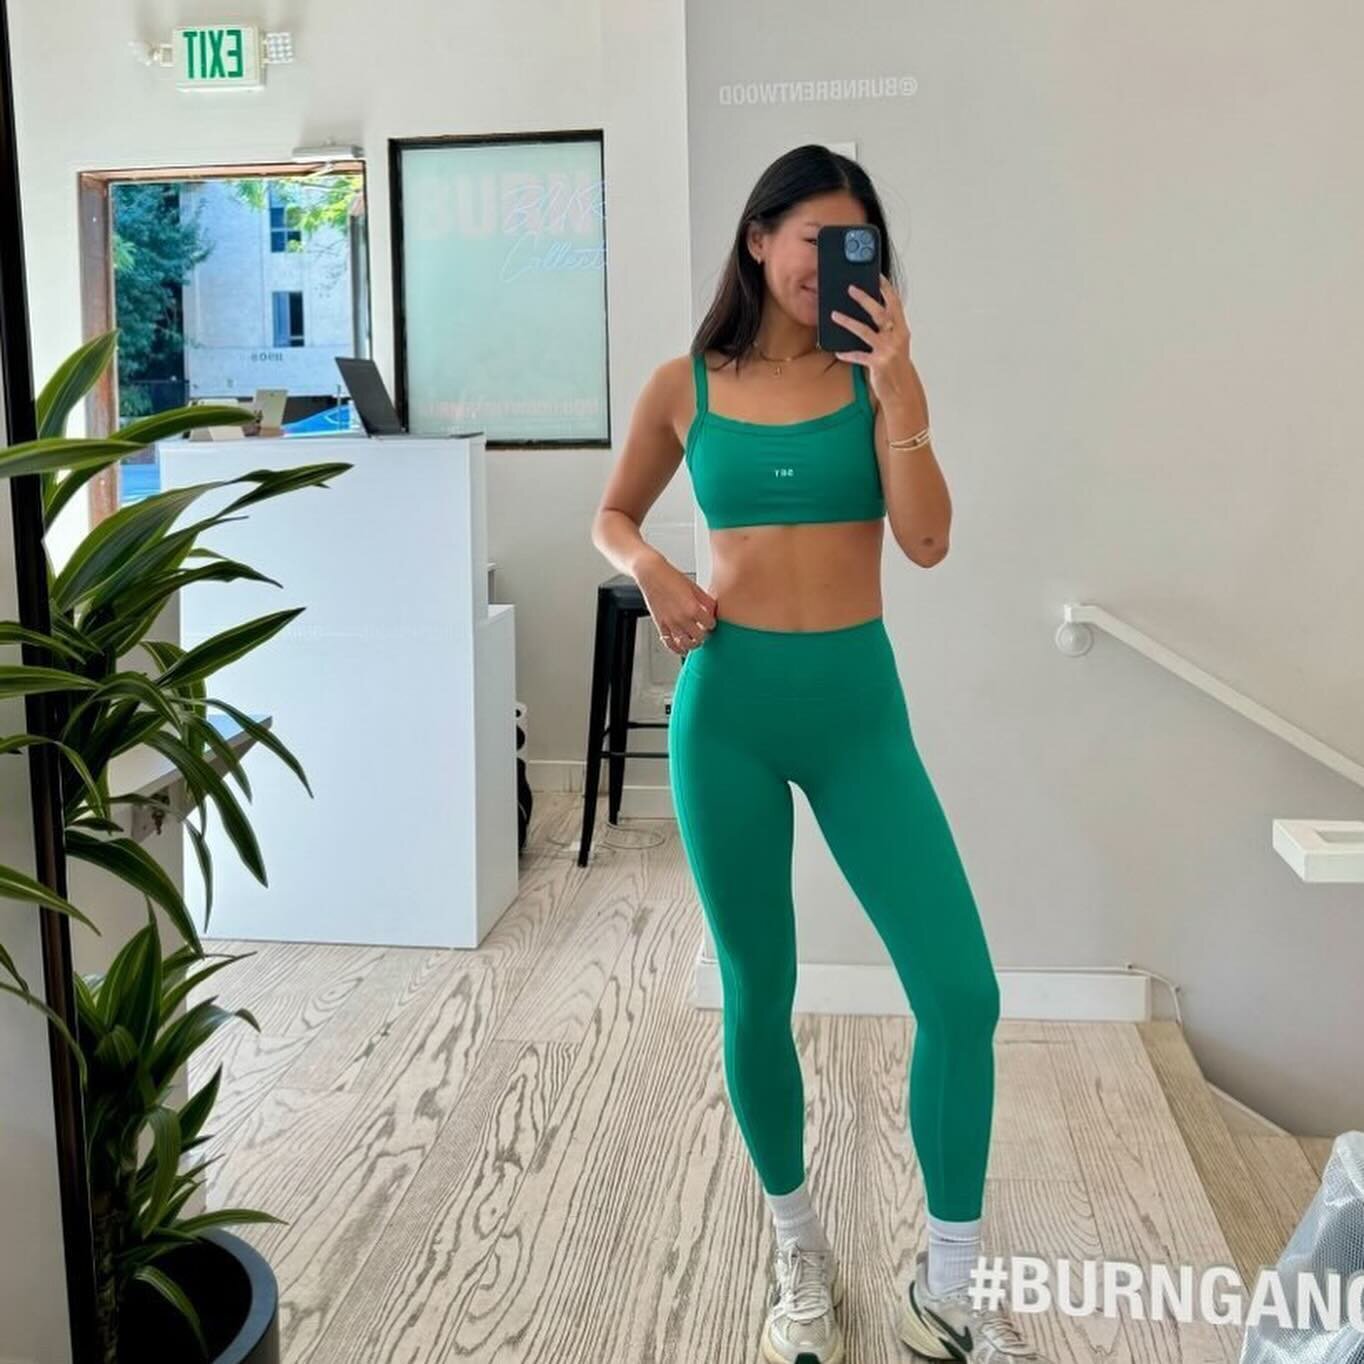 A week in review💪🏽 From our girl @vivienneelee looking fierce in her @setactive 💚 to Team workouts, to our FAV @tower28beauty post sweat sesh❤️ to this community bringing all the love❤️&zwj;🔥 to a week ahead serving a little extra self love, a li